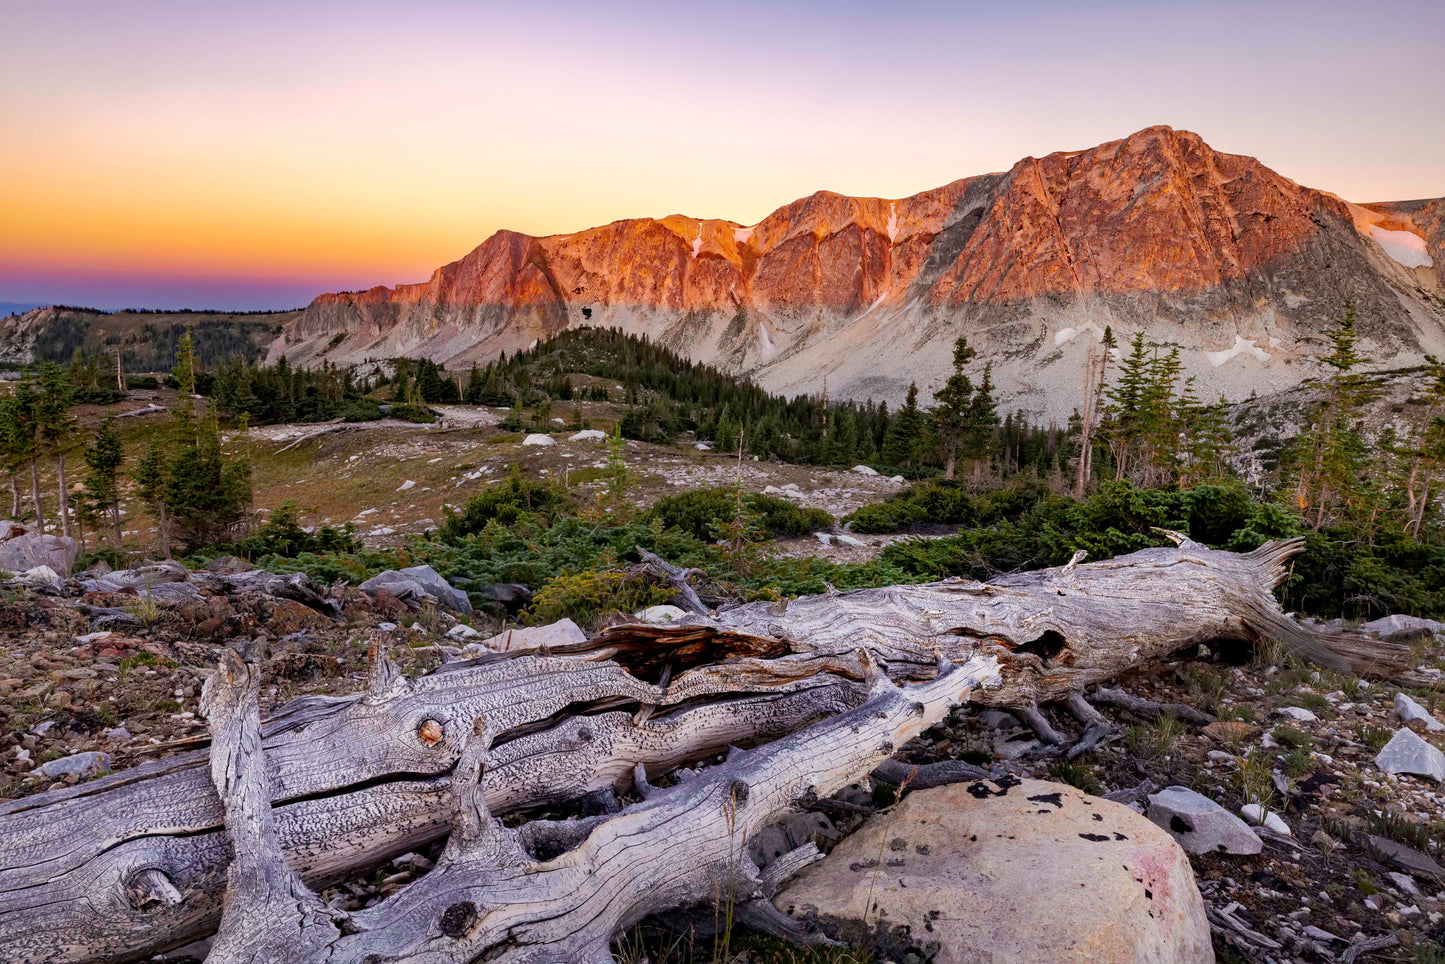 " Medicine Bow Morning View " Lustre Print Photographer: Kyle Spradley  Summer sunrise from a viewpoint of Medicine Bow Peak above the Lakes Trail in the Snowy Range Mountains just west of Laramie Wyoming